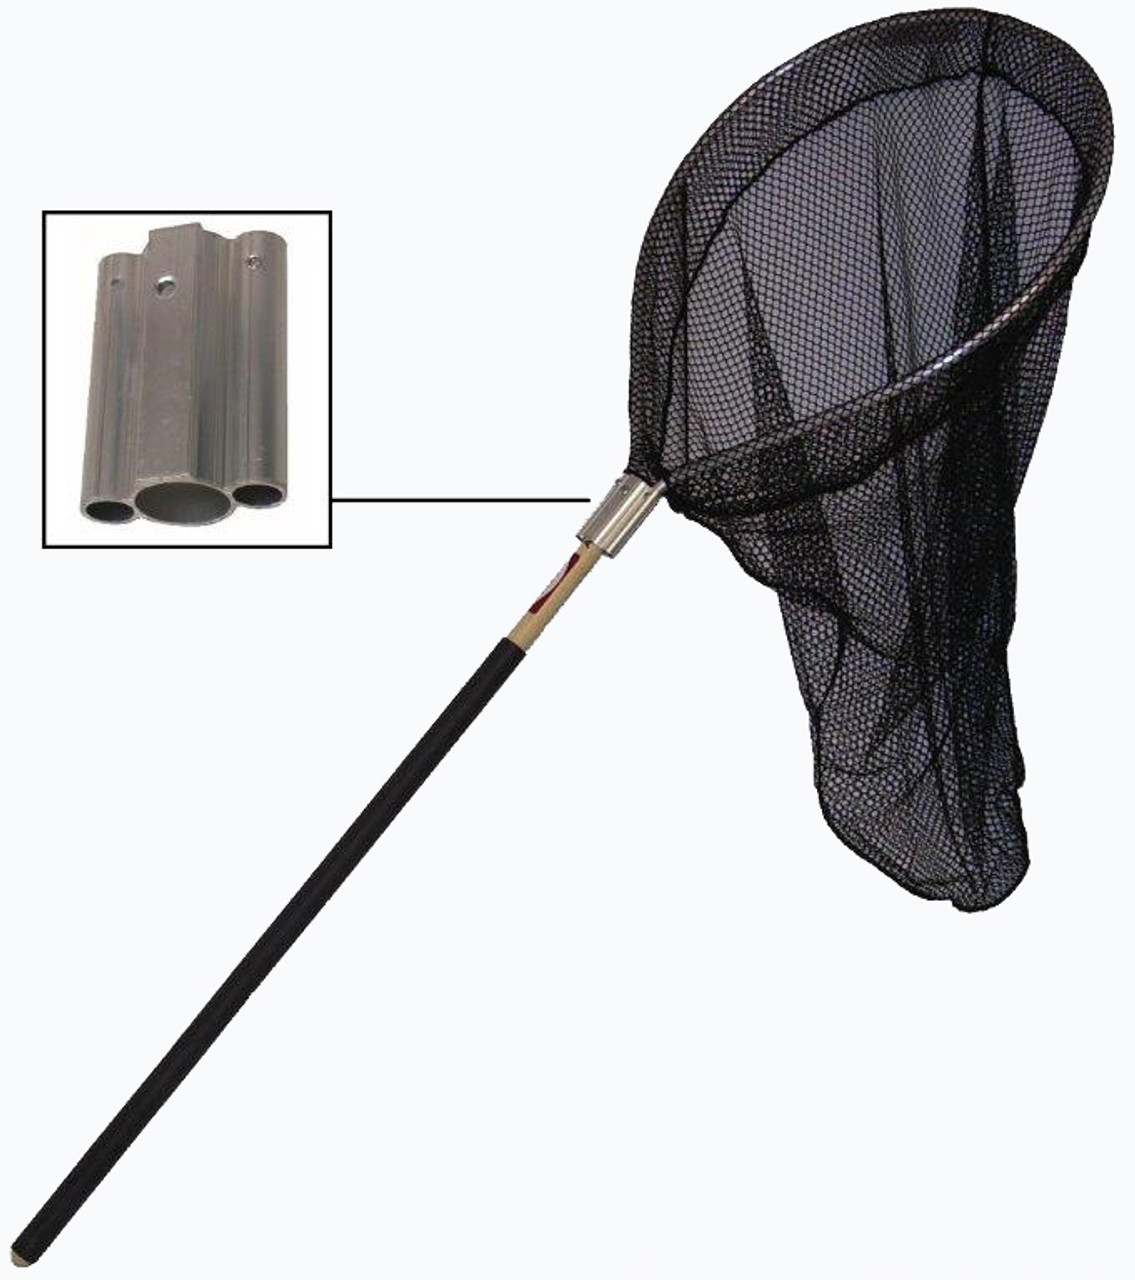 This Heavy Duty Catching Net with 48 handle and 36 net comes